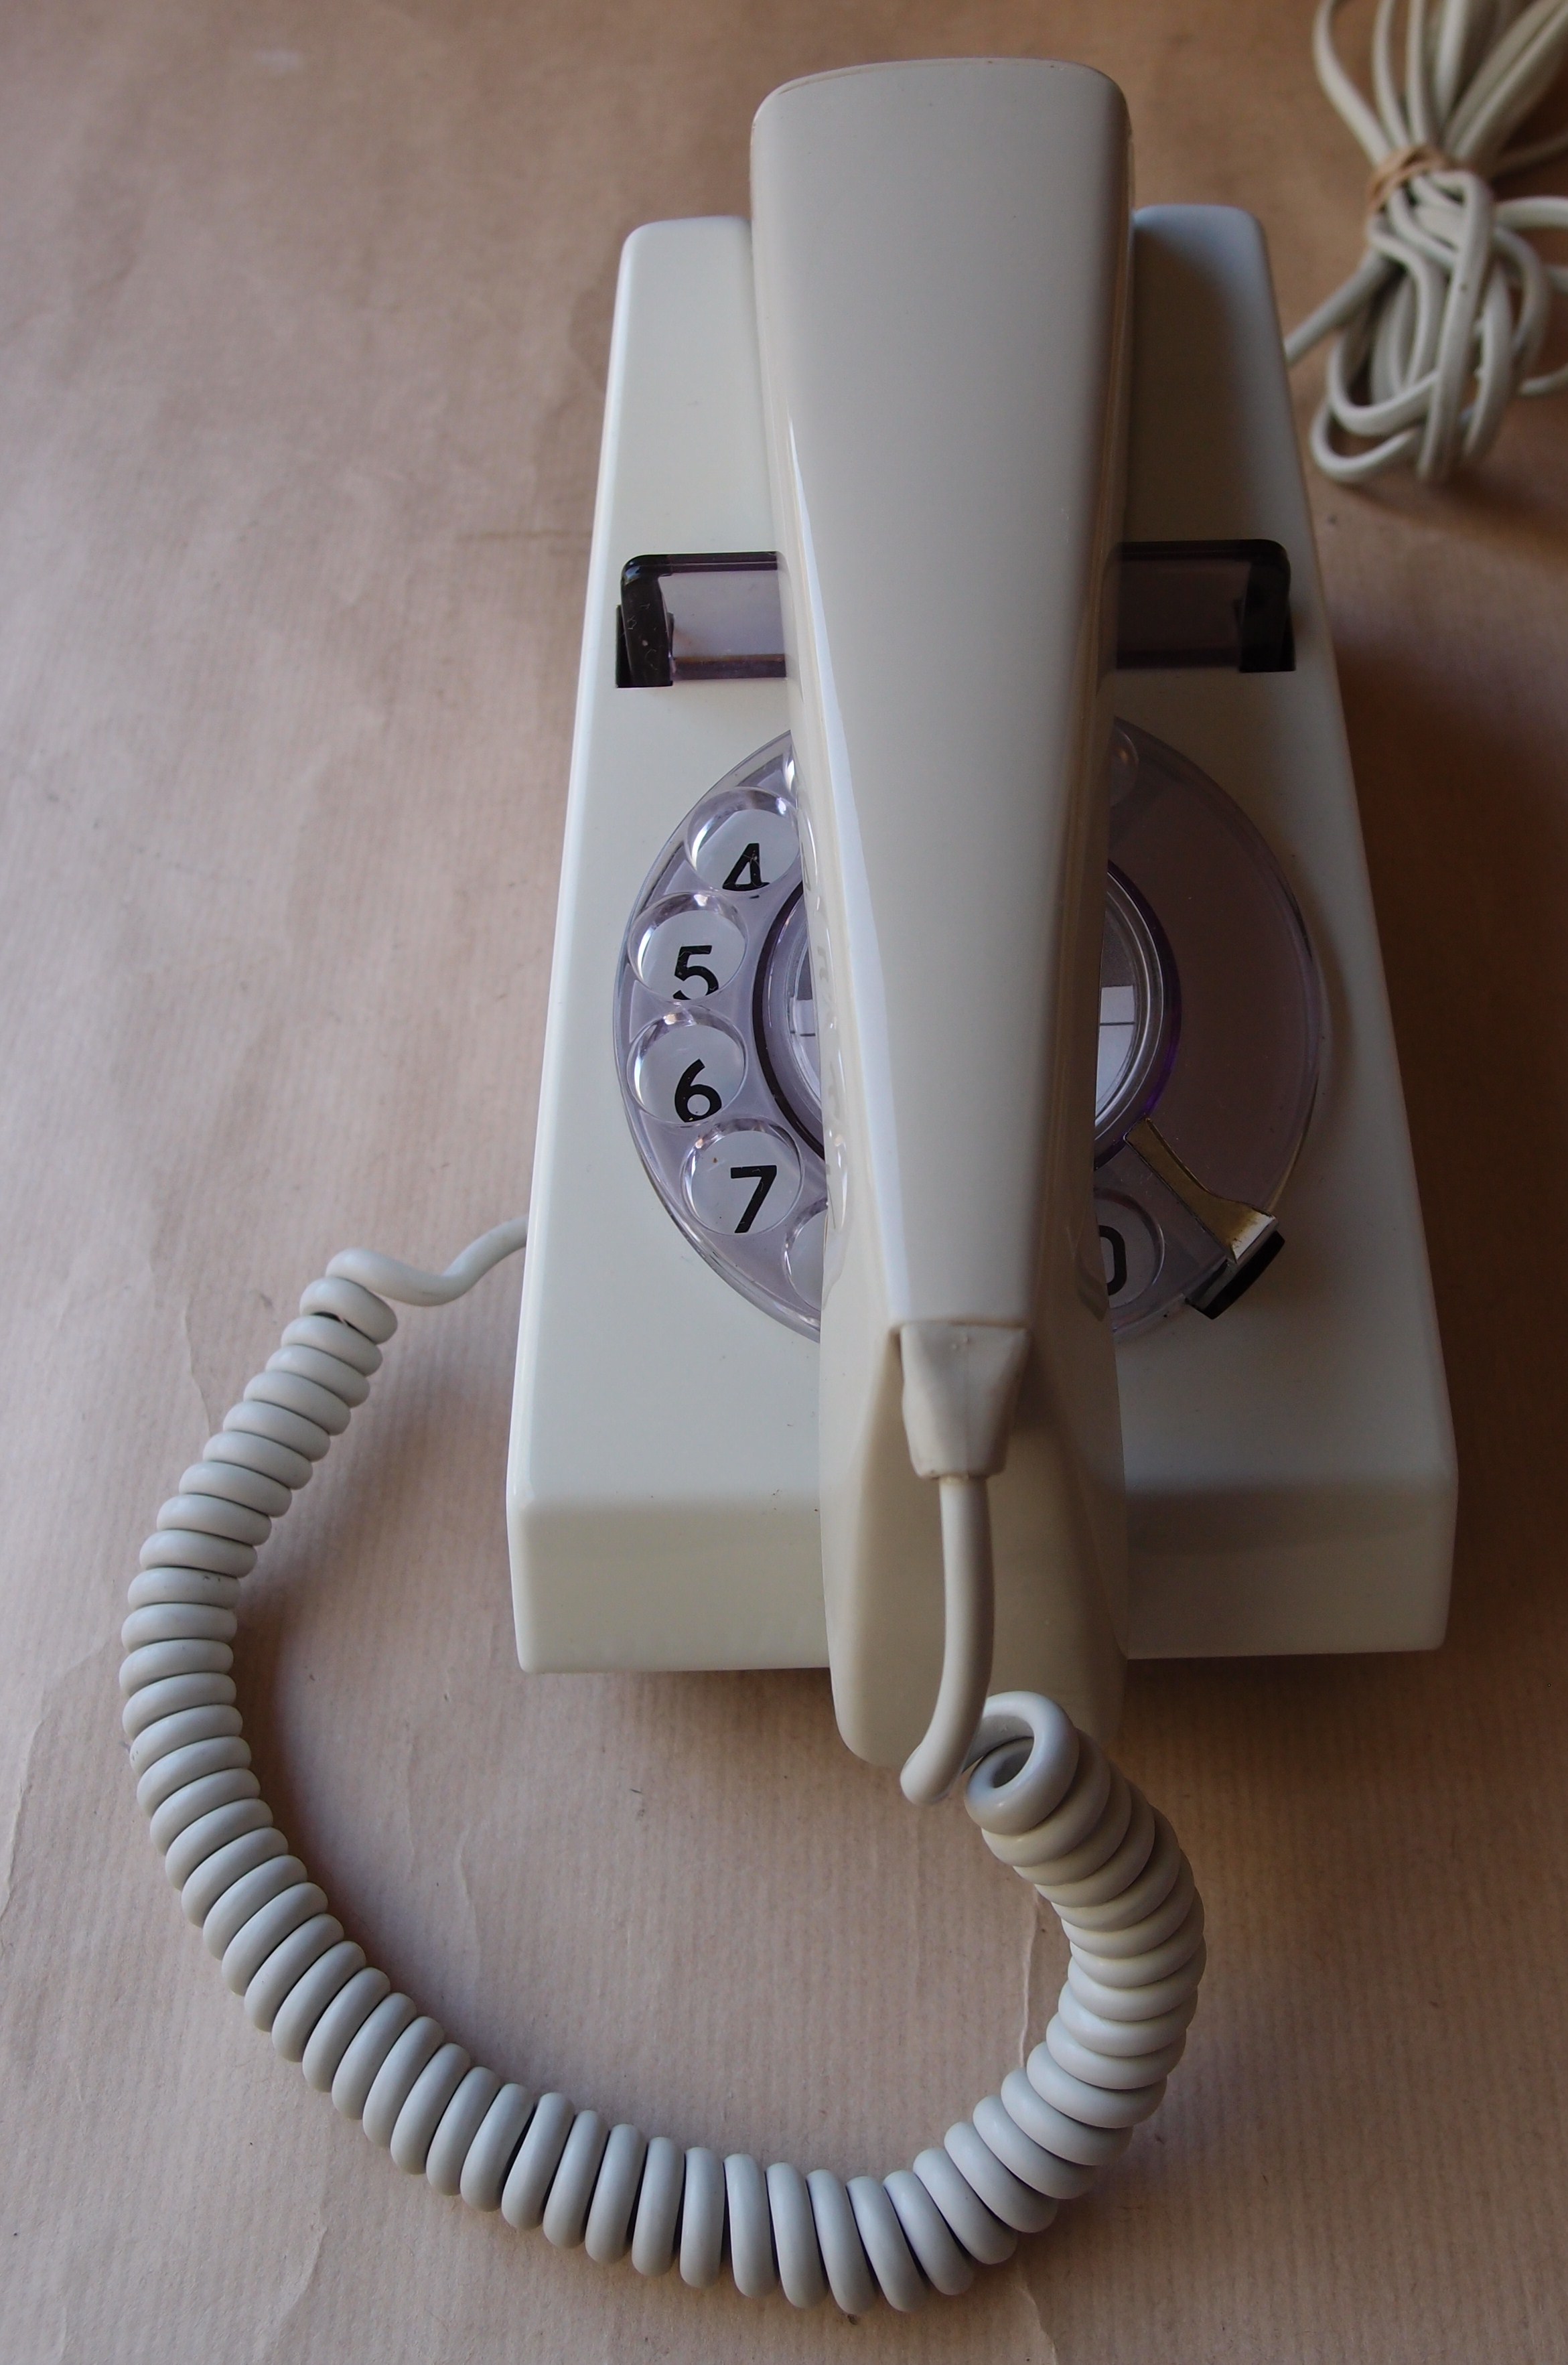 1971 2722 Trimphone telephone in grey and white